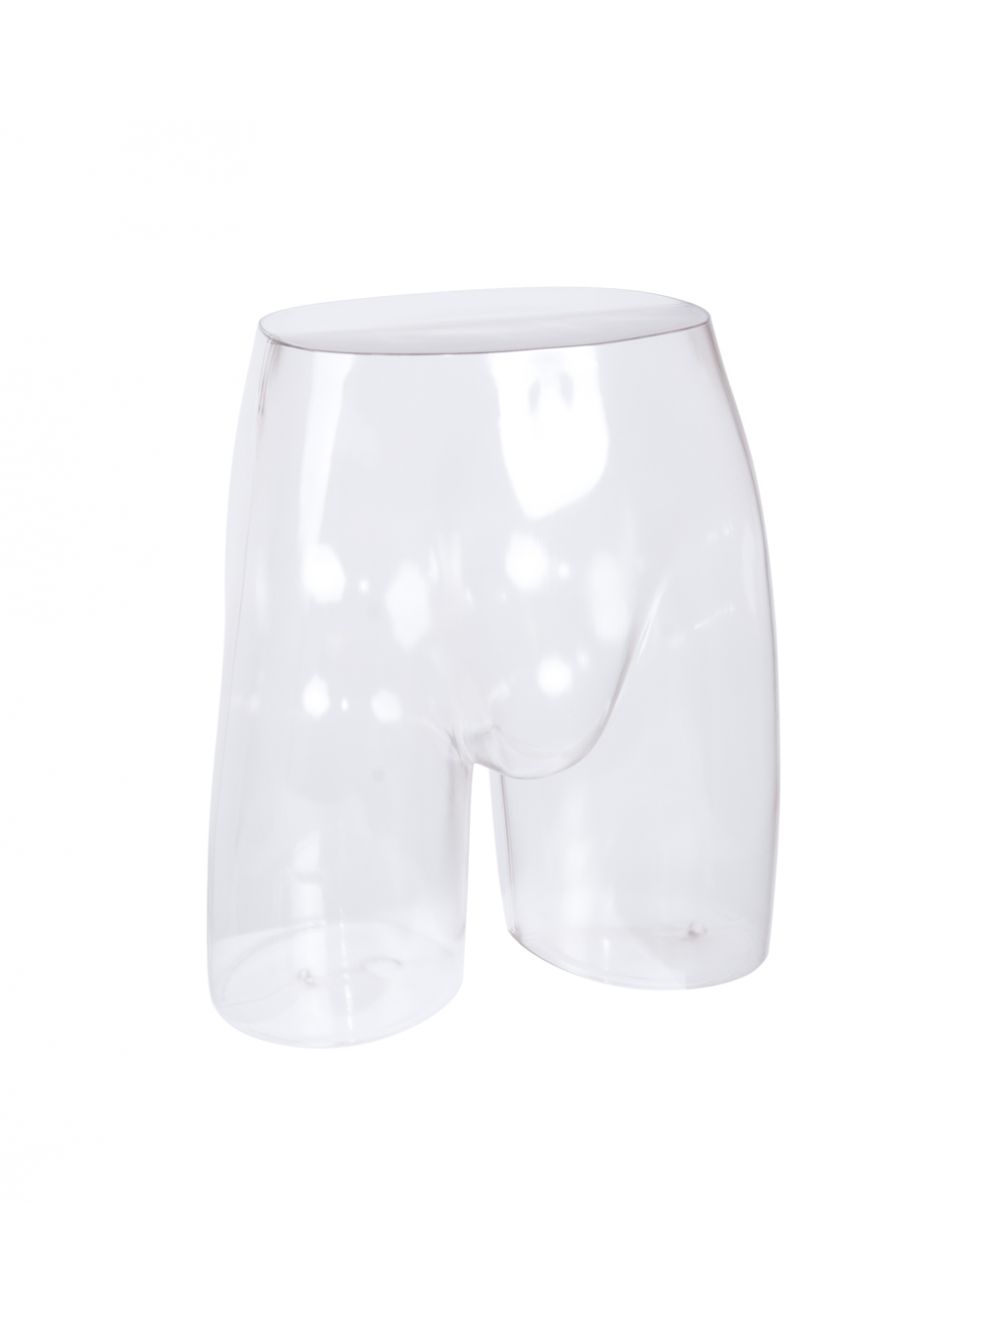 MALE CLEAR UNDERWEAR DISPLAY mannequins for Torso & Leg Display